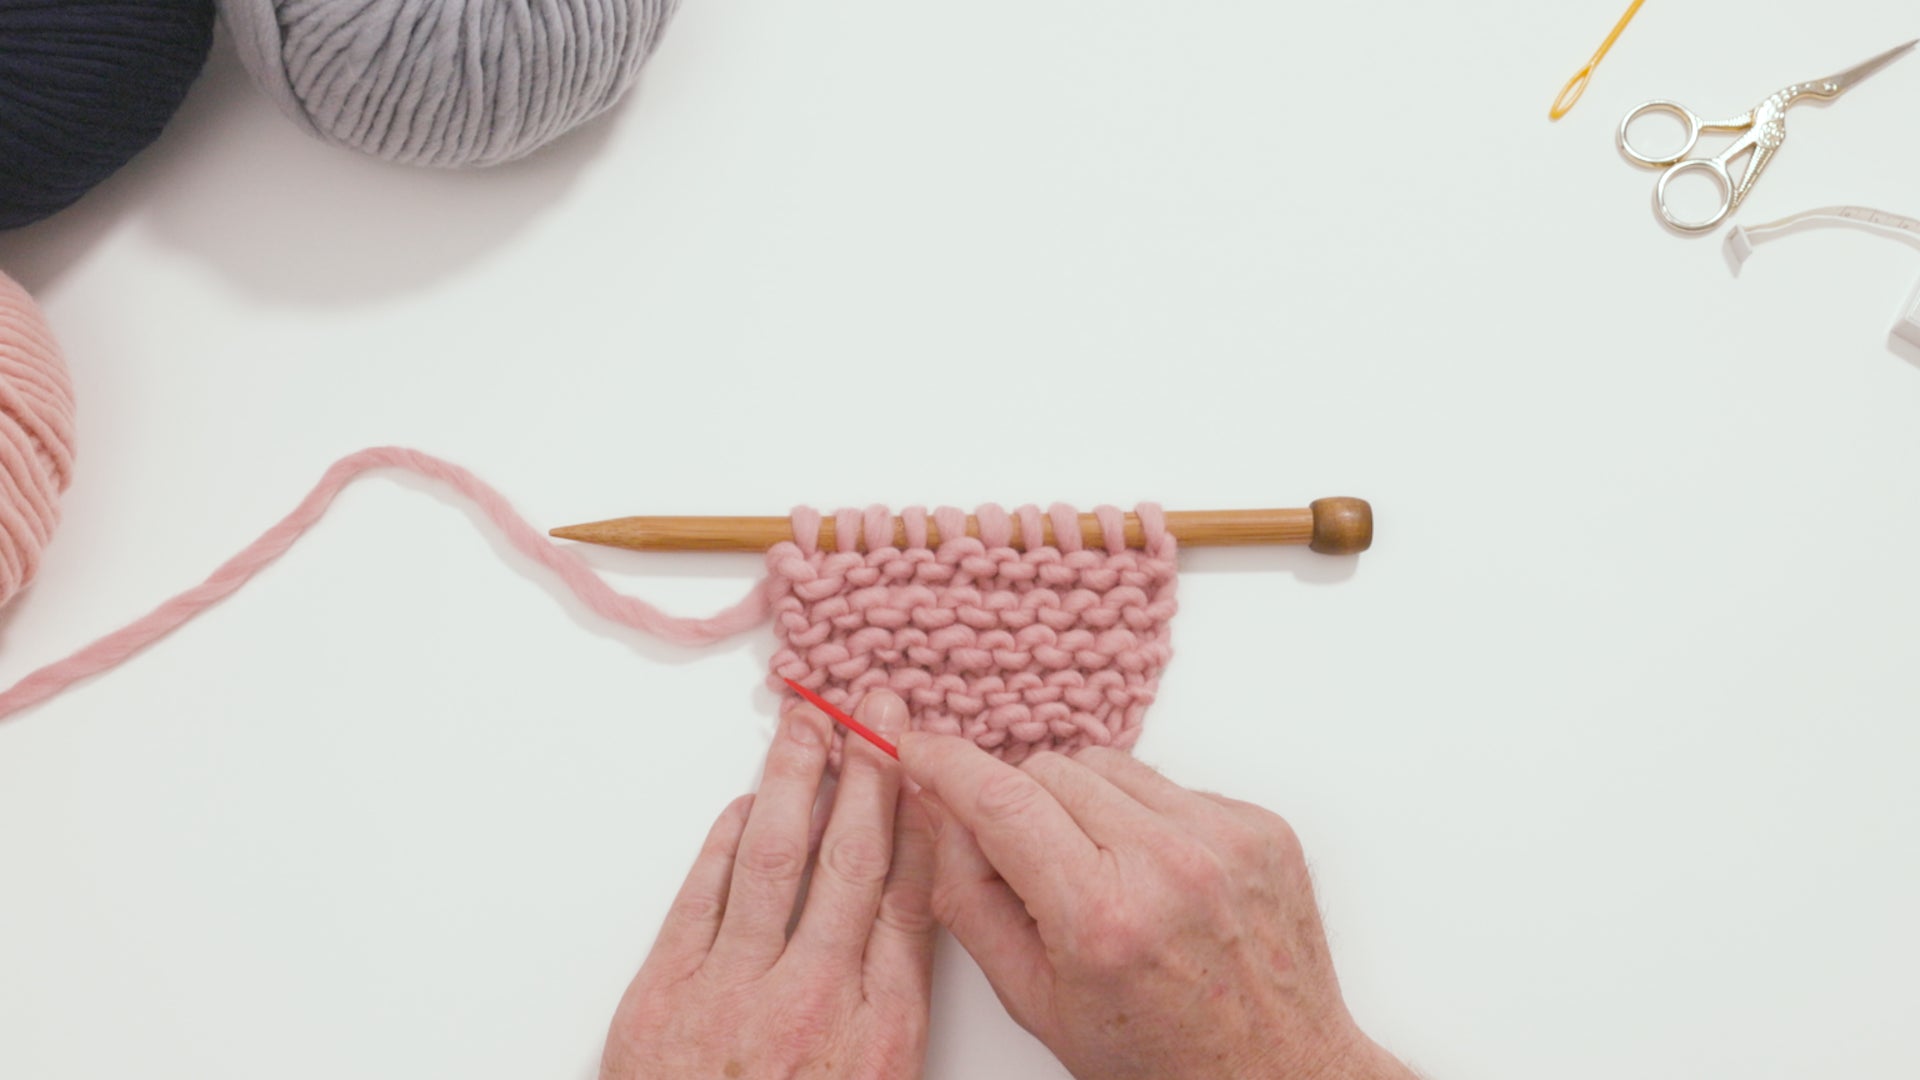 How to Fix Common Mistakes in Knitting with Video Tutorial